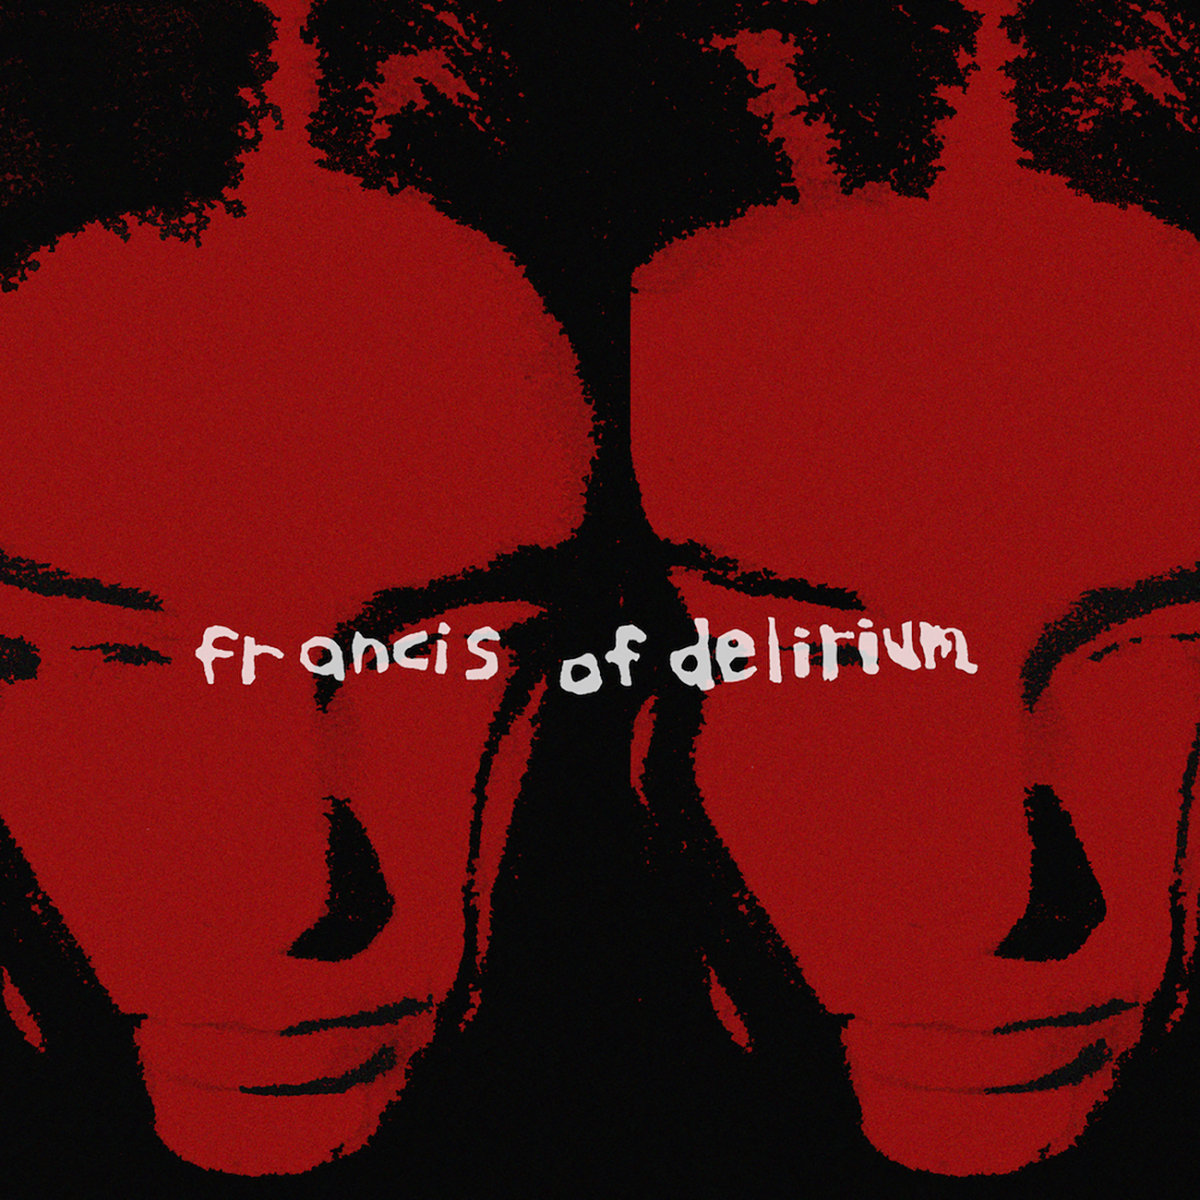 cover art for the fun house by francis of delirium. two heads side by side, ran through a red filiter. white text that reads francis of delirium.